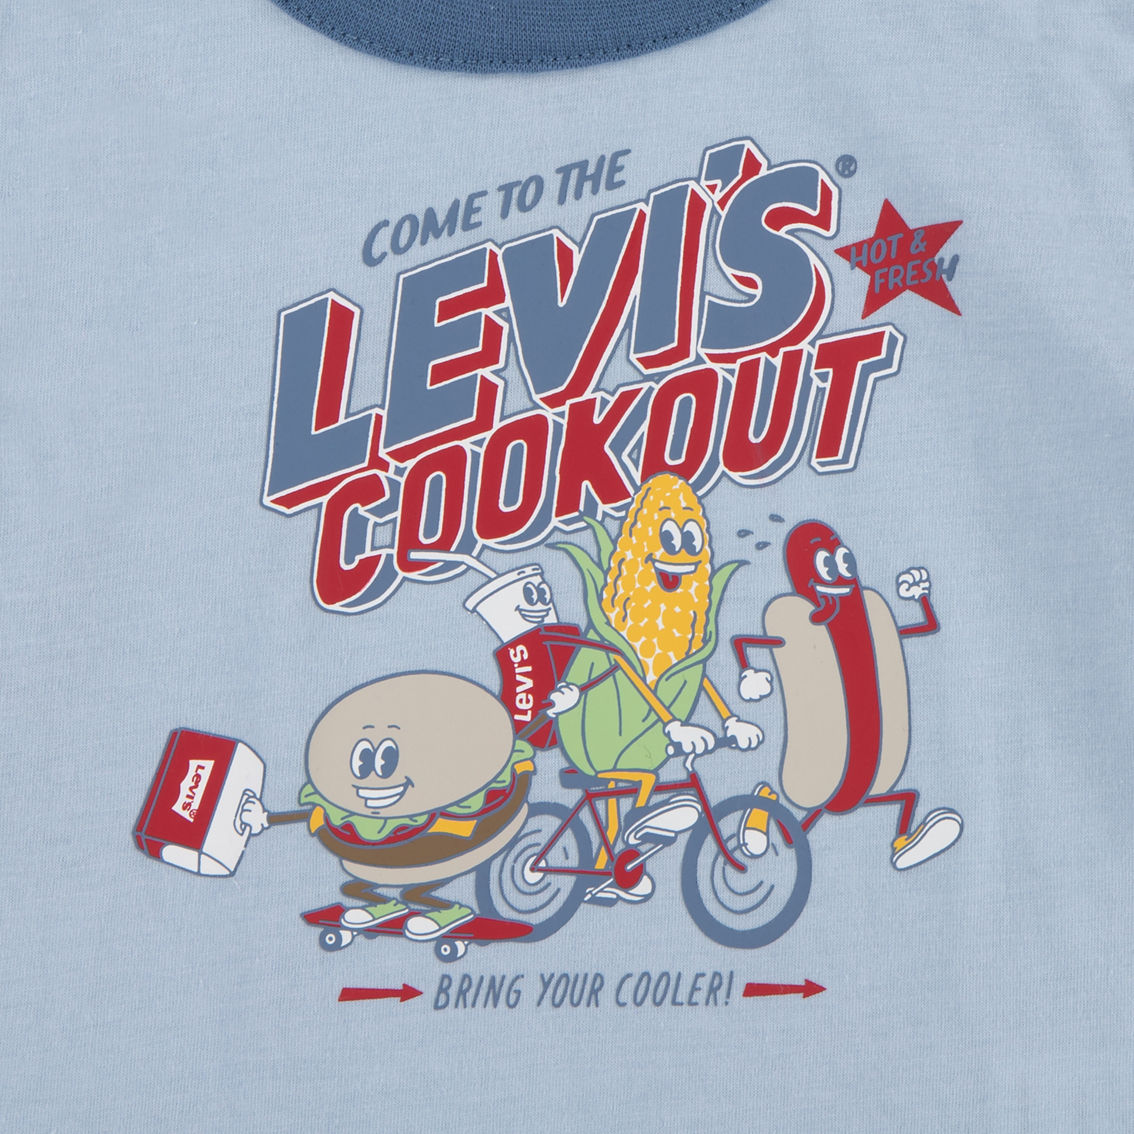 Levi's Baby Boys Cookout Tee and Shorts 2 pc. Set - Image 3 of 7